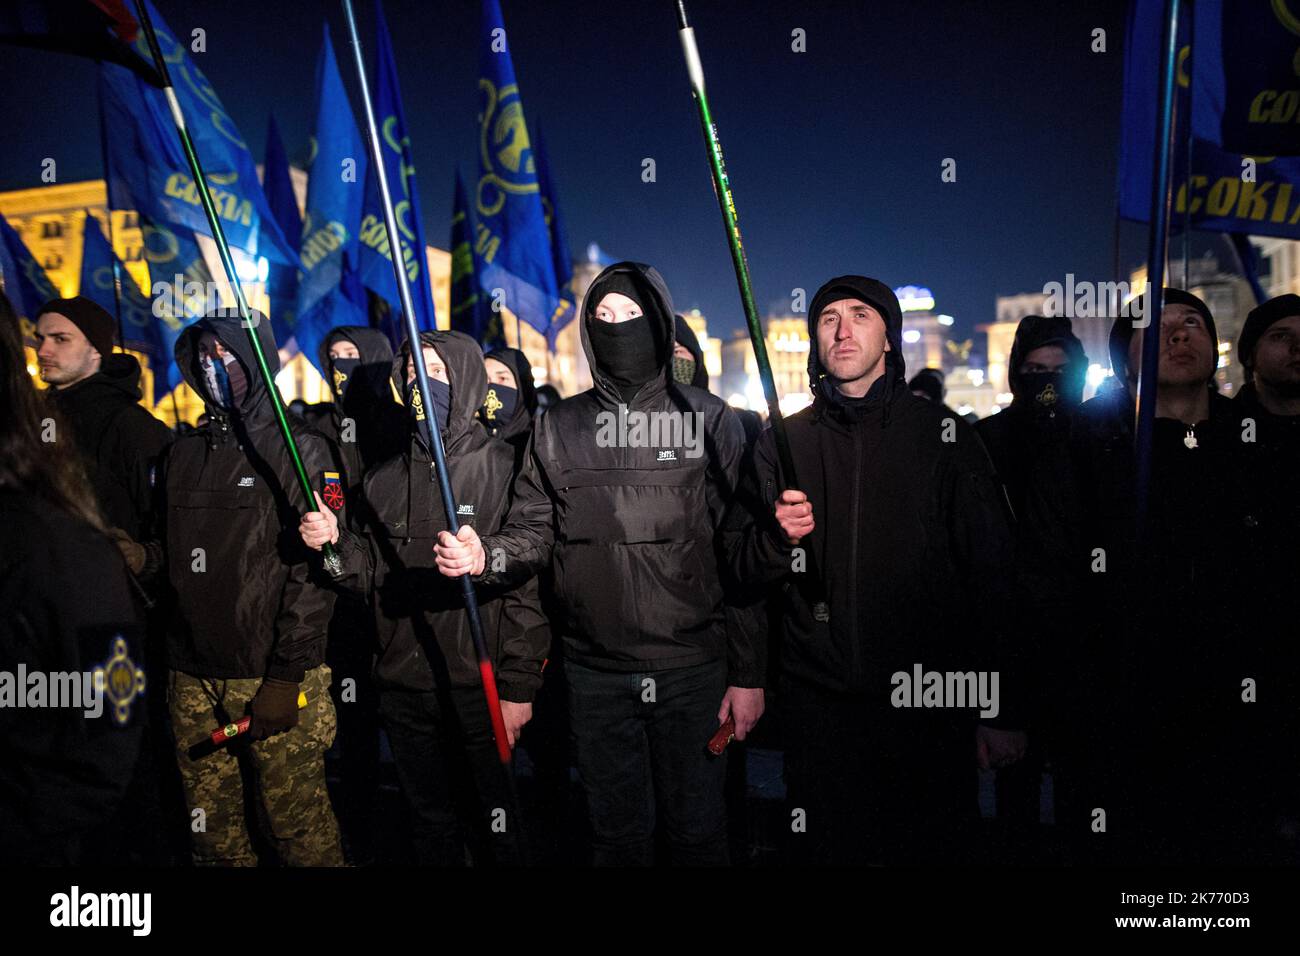 Members and sympathizers of the -Sokil-, -Sector Law- and other nationalist organizations marched through the streets of Kiev. Sokil is a sports and military society for youth that aims to develop the Ukrainian society and state on the basis of modern Ukrainian social nationalism. Stock Photo